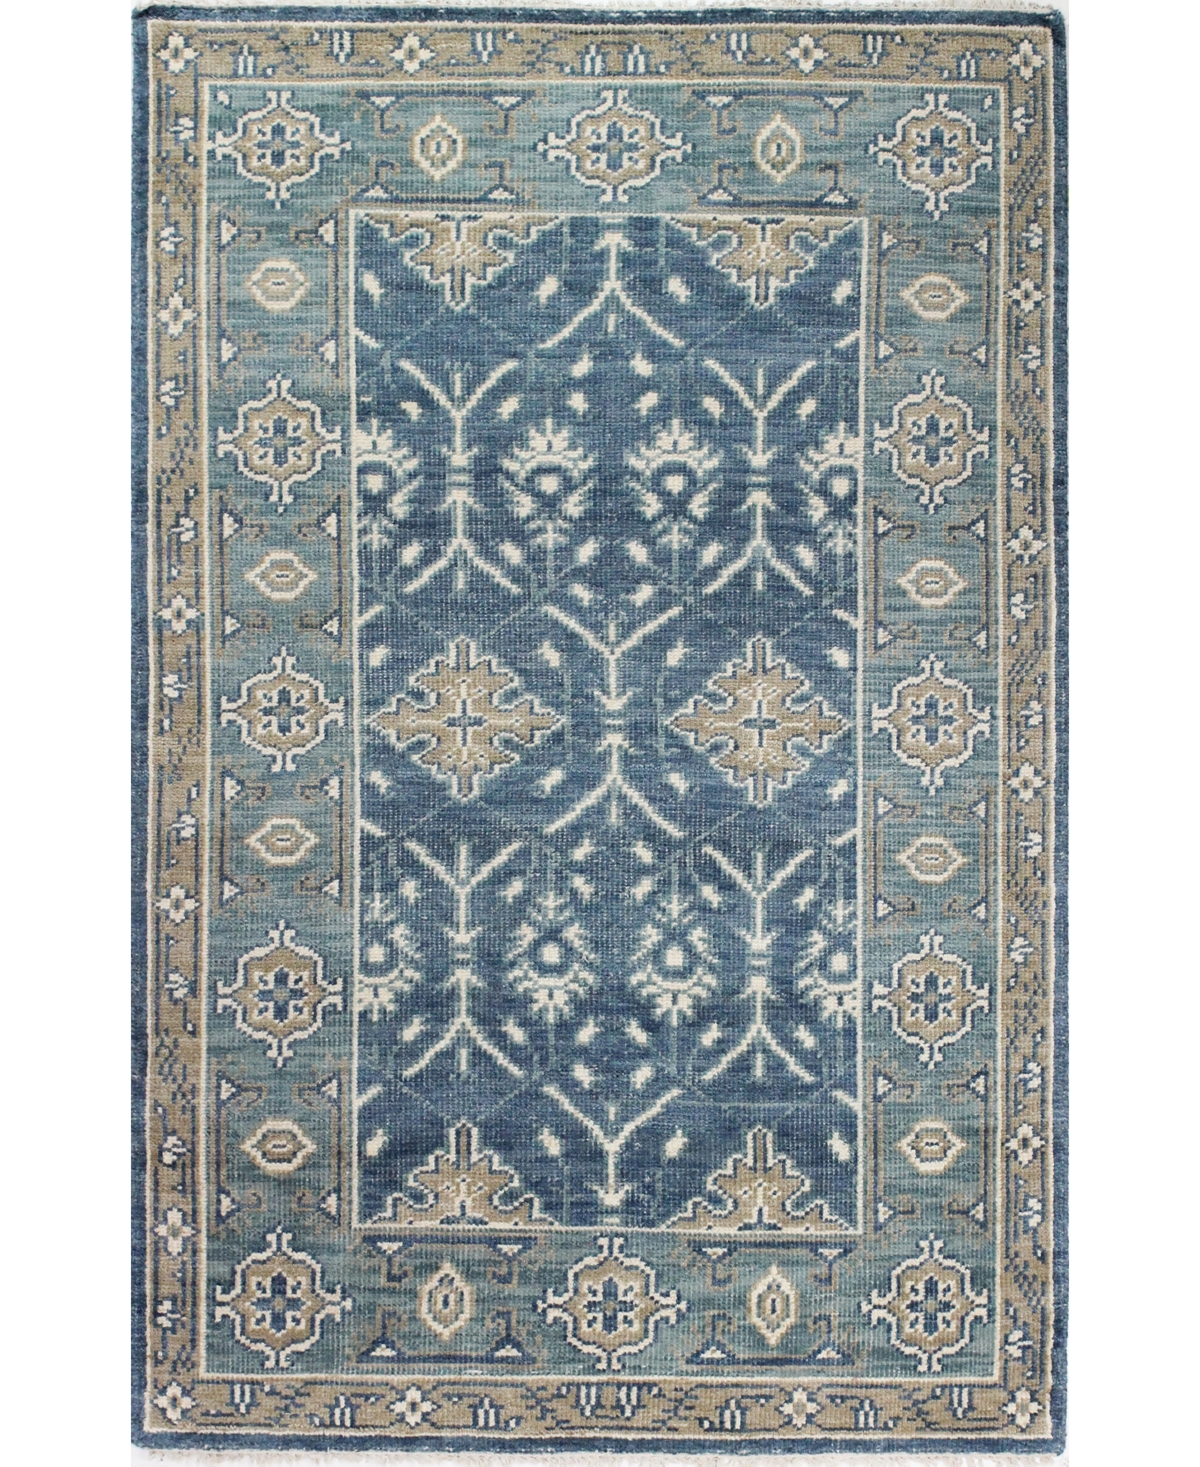 Bb Rugs Carah AR115 7' 6in x 9' 6in Area Rug - Blue